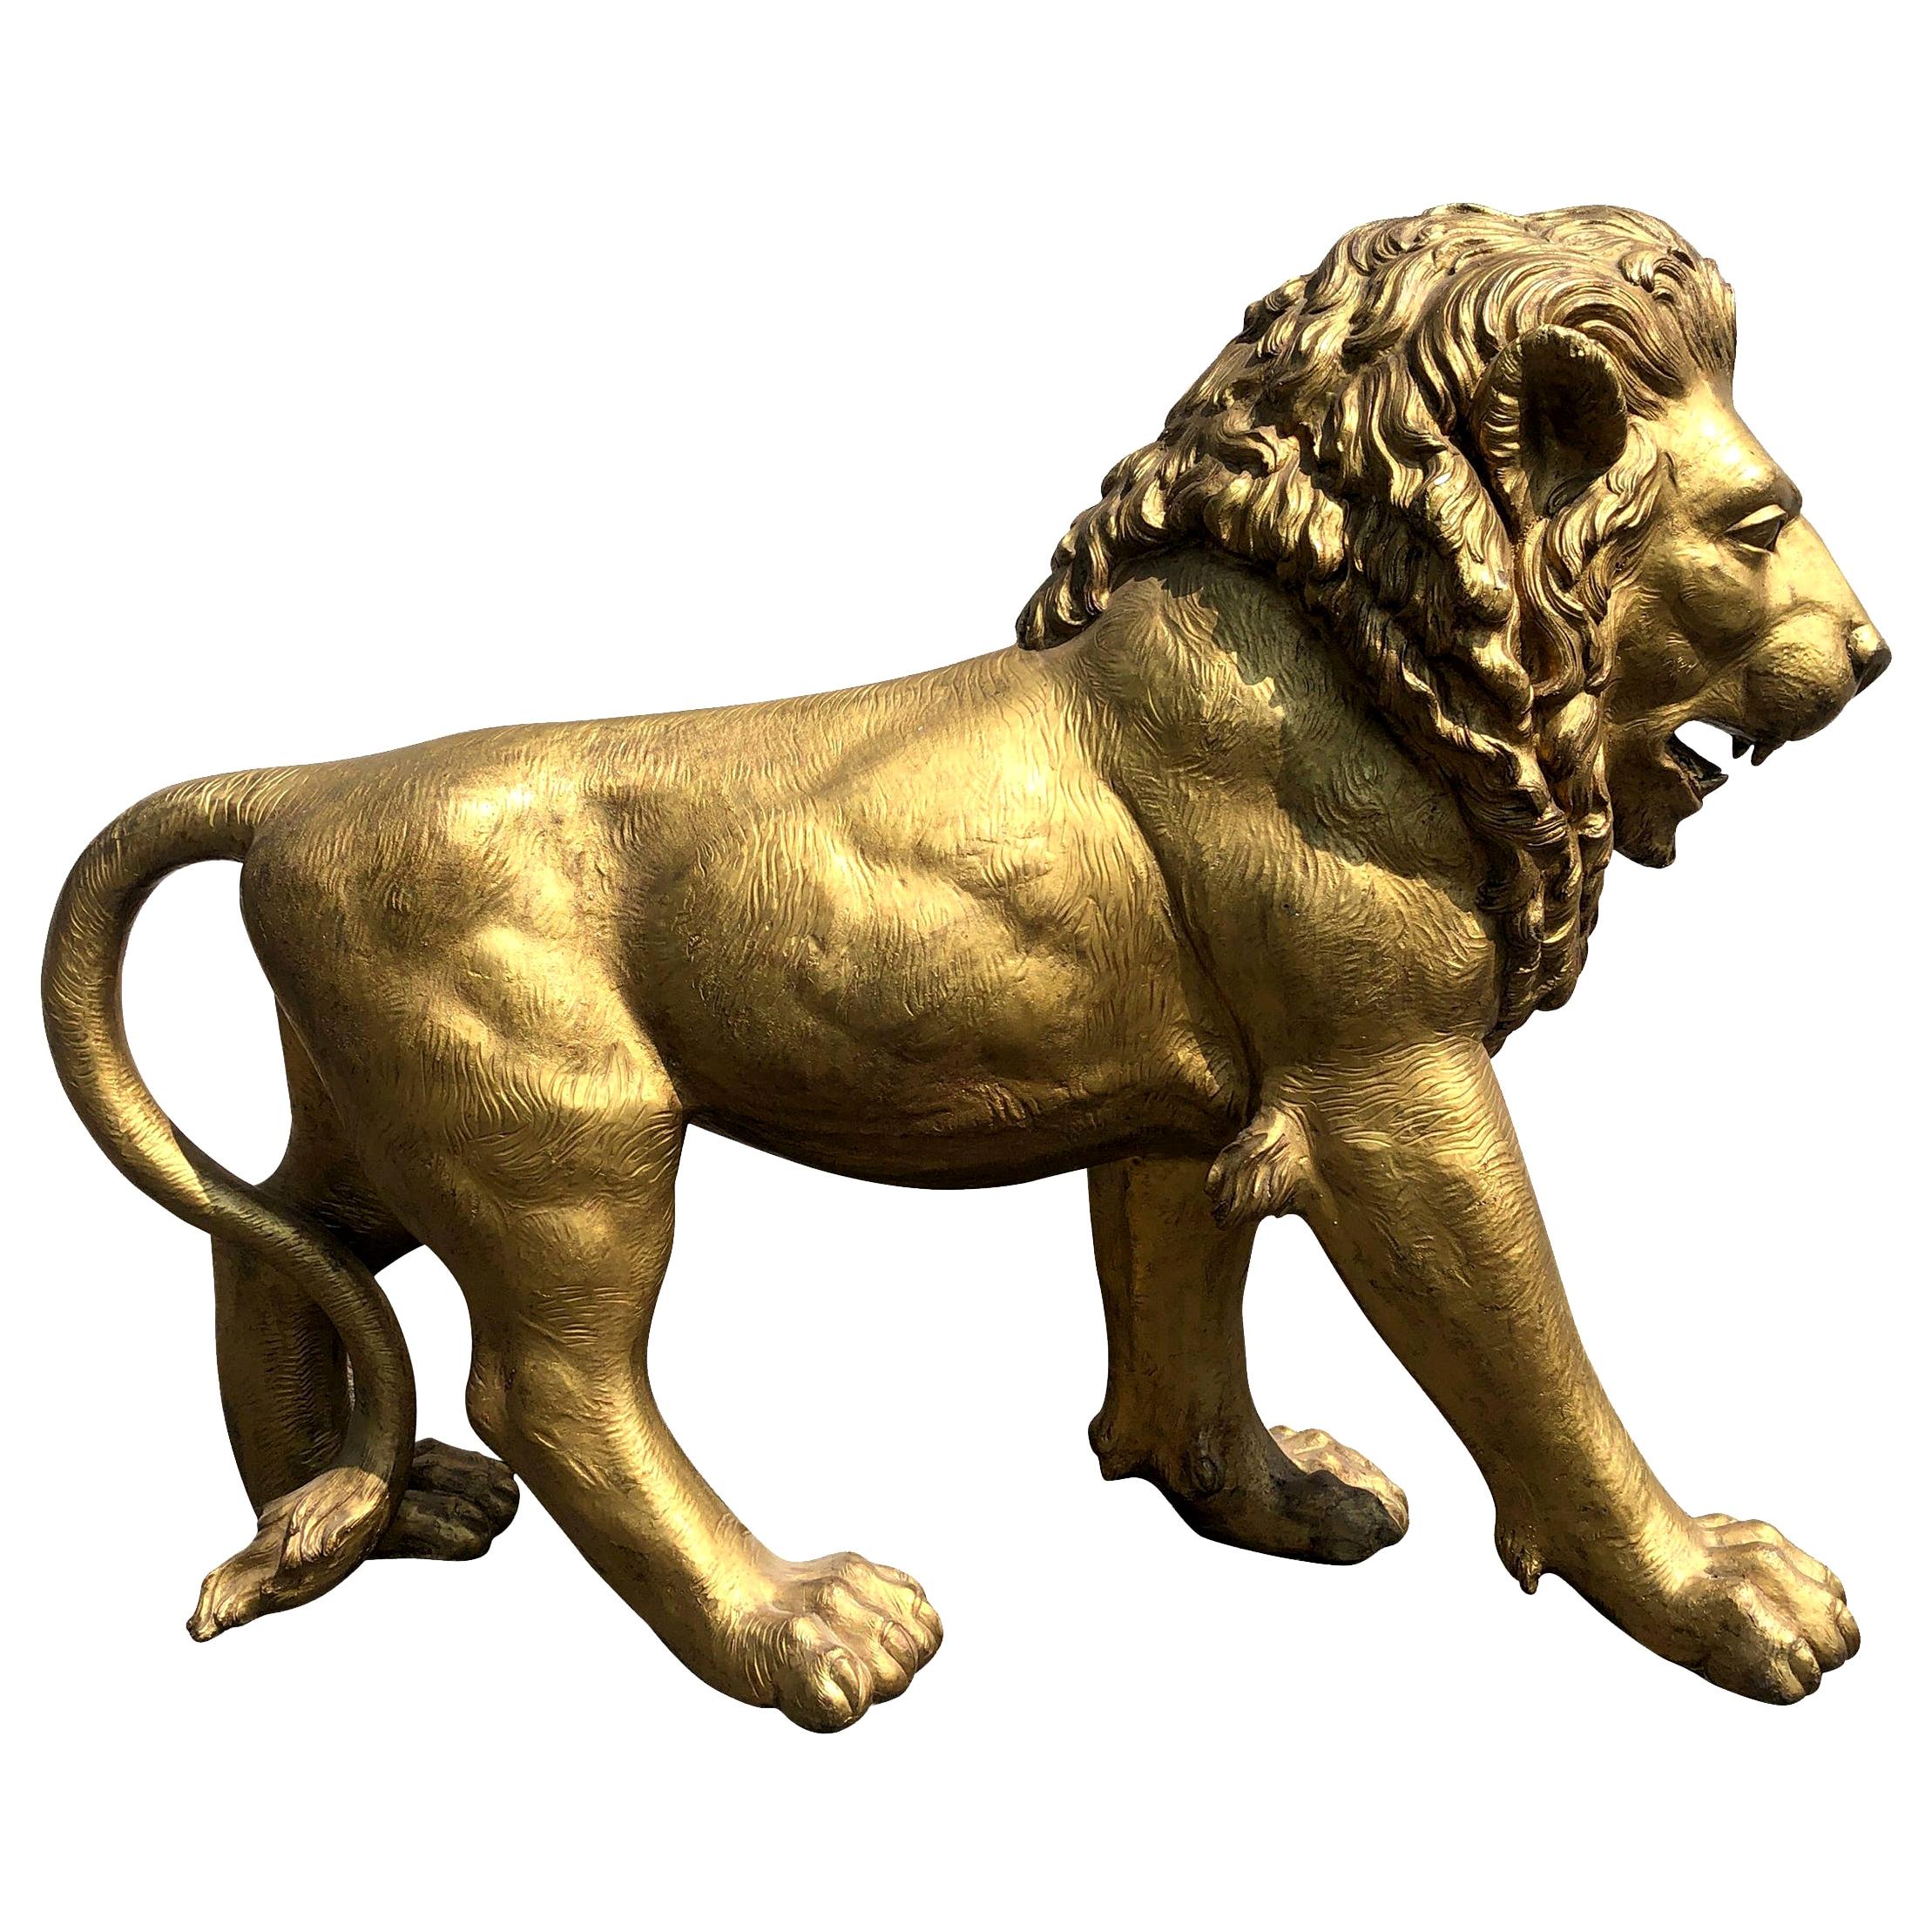 Golden Bronze Animal Sculpture Representing a Lion from Paris from 1940s